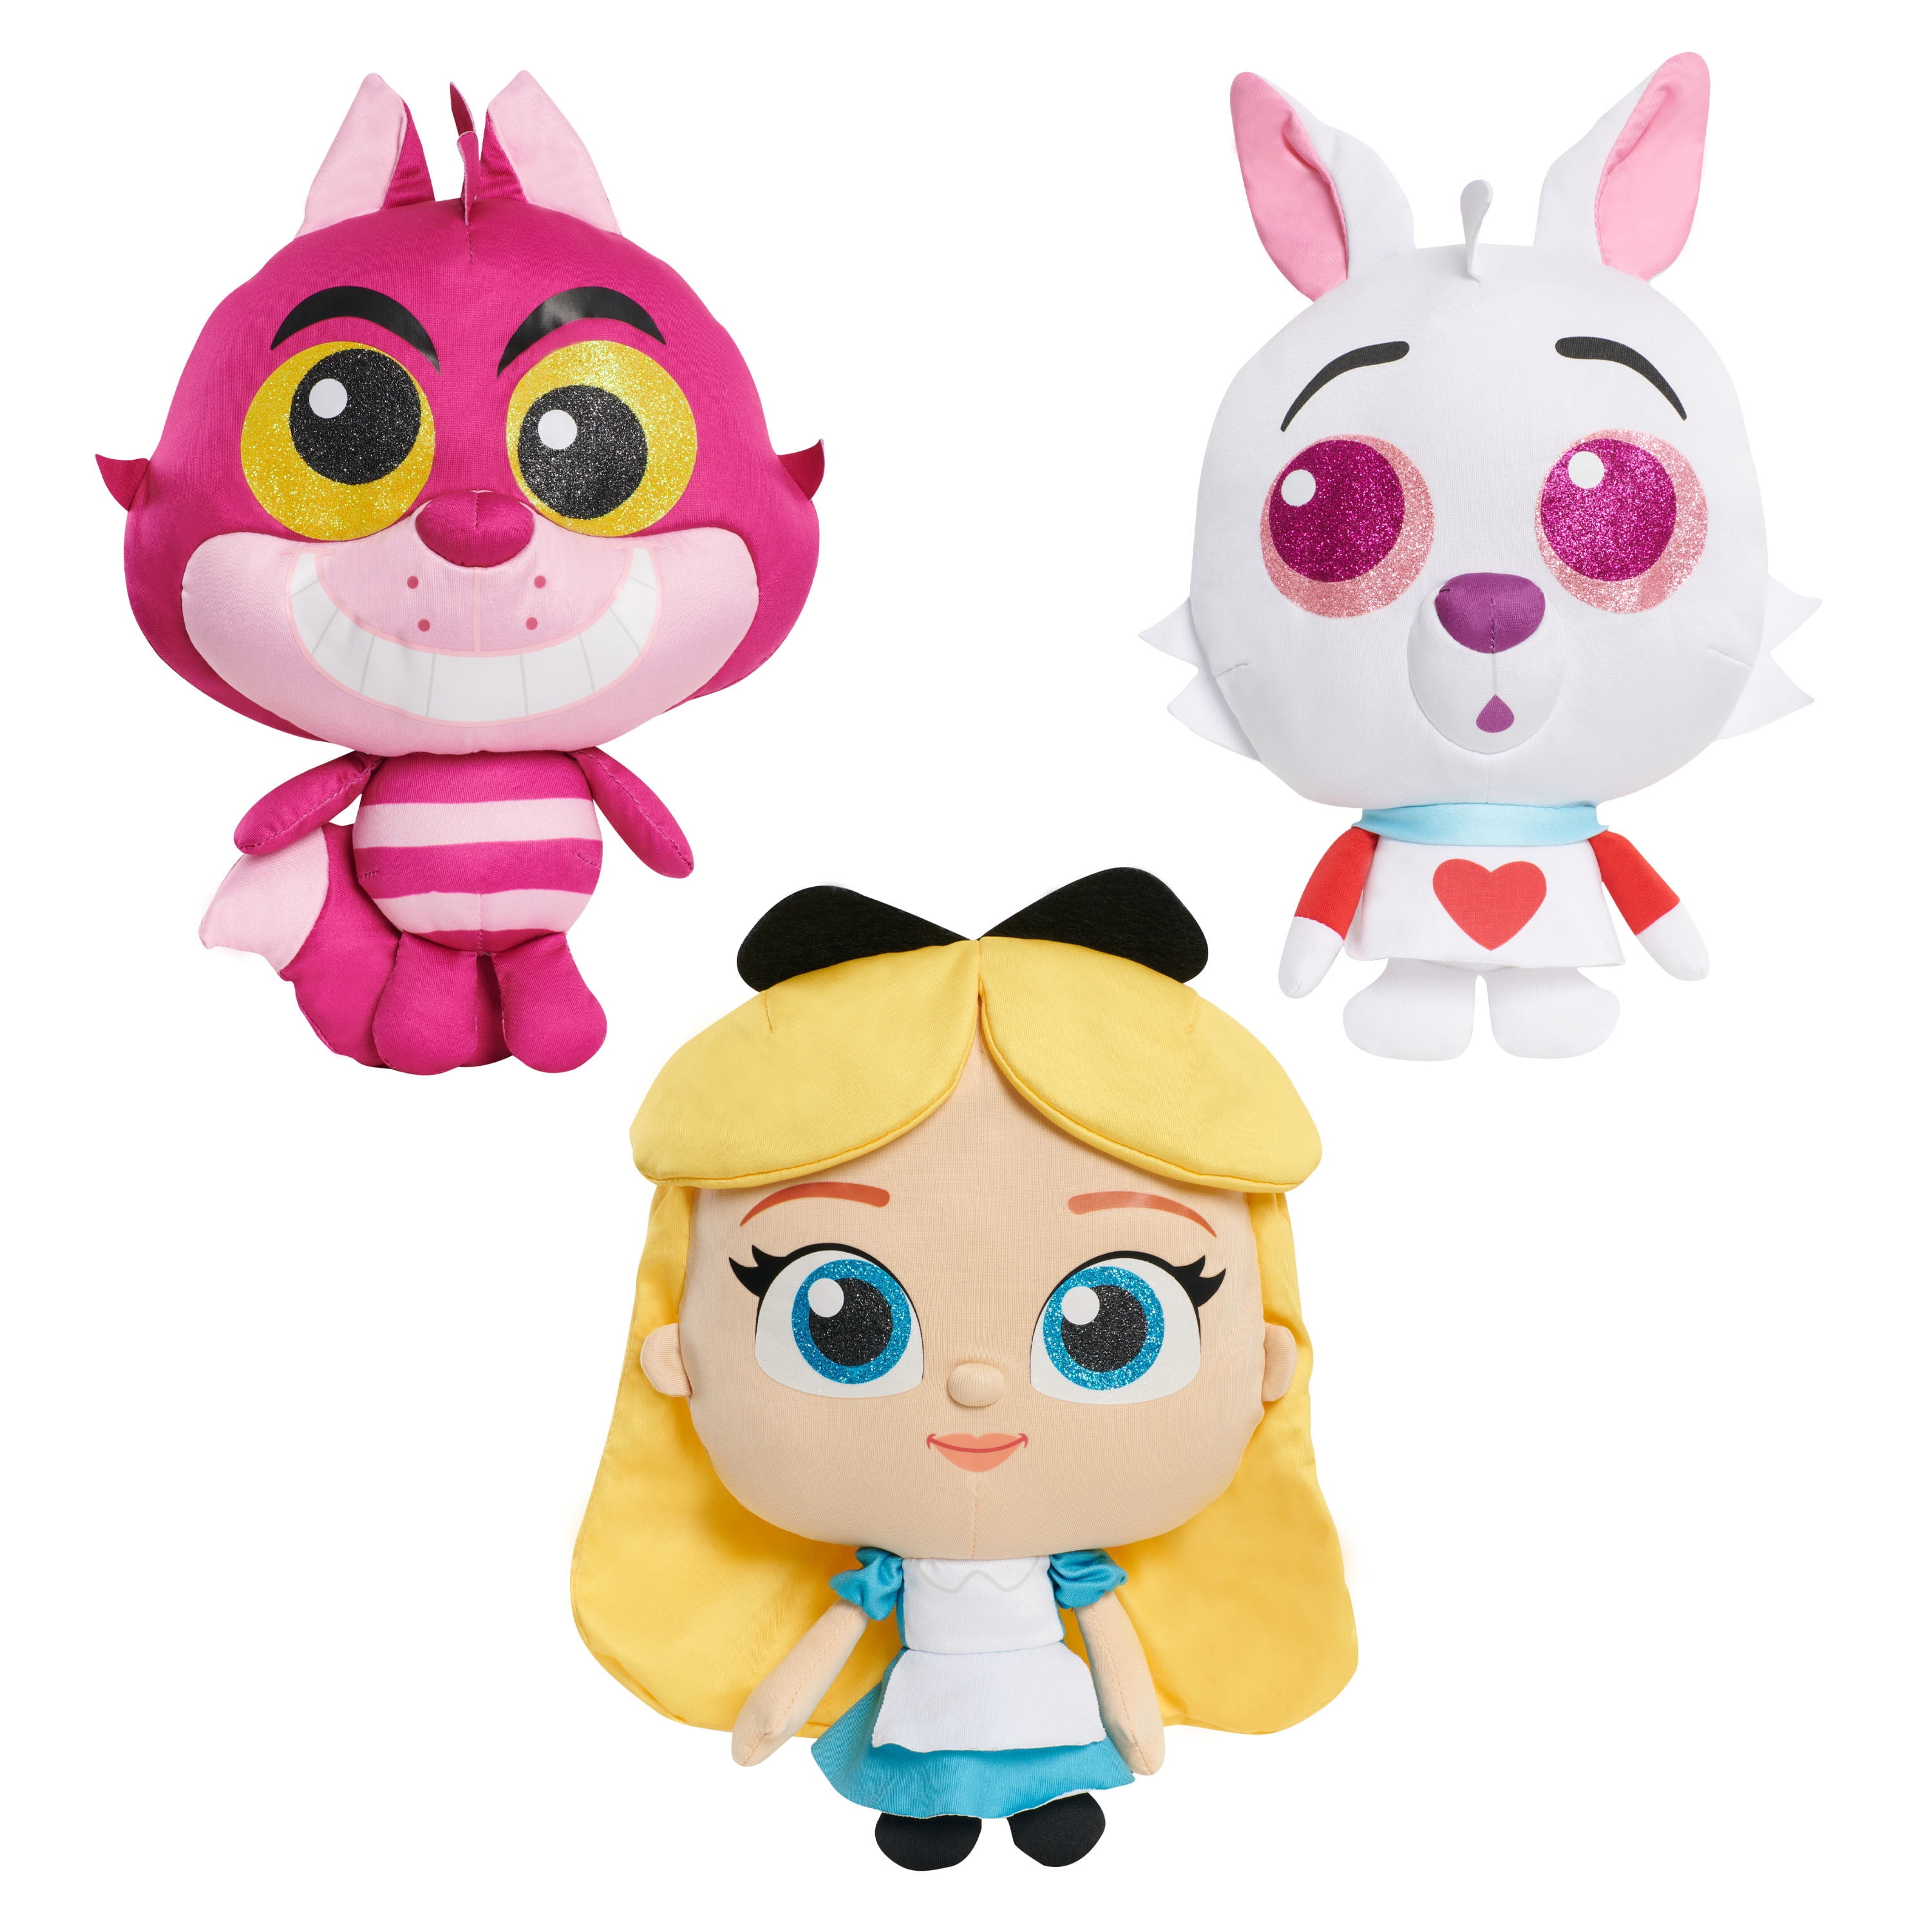 Disney Doorables Puffables Assortment, 10-Inch Squishy Plush Featuring Glitter Eyes, Styles May Vary, Officially Licensed Kids Toys for Ages 3 Up, Gifts and Presents